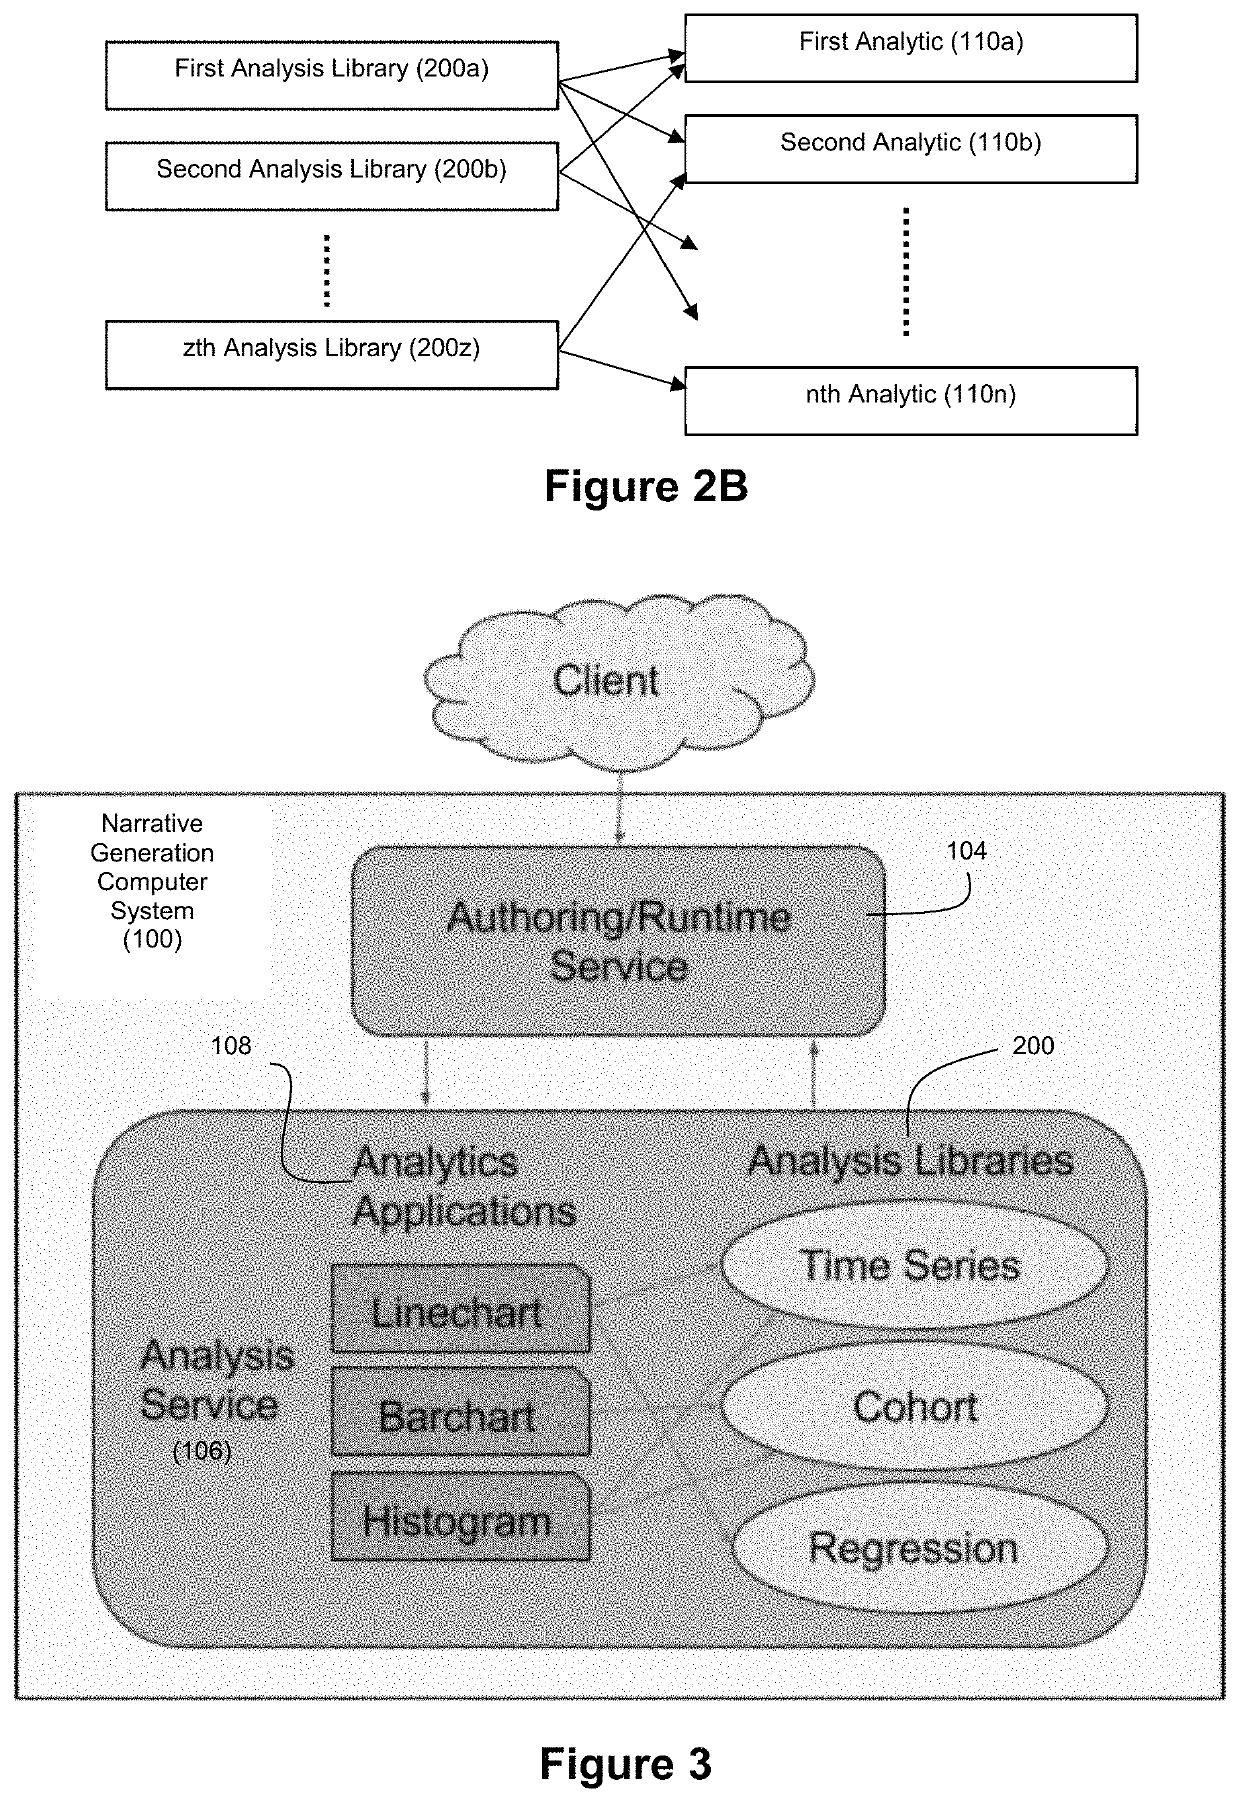 Applied artificial intelligence technology for narrative generation using an invocable analysis service and configuration-driven analytics